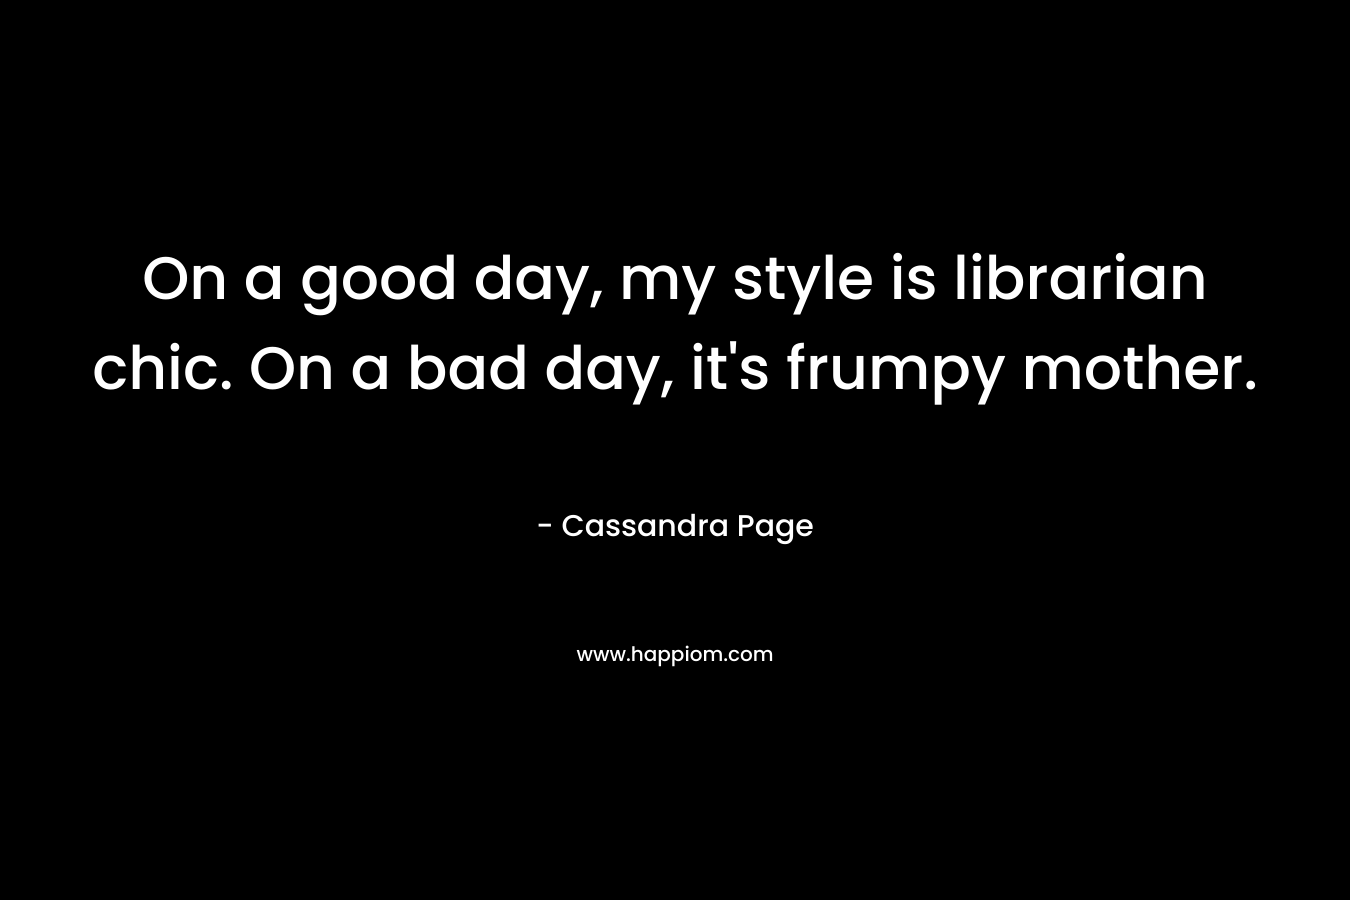 On a good day, my style is librarian chic. On a bad day, it’s frumpy mother. – Cassandra Page